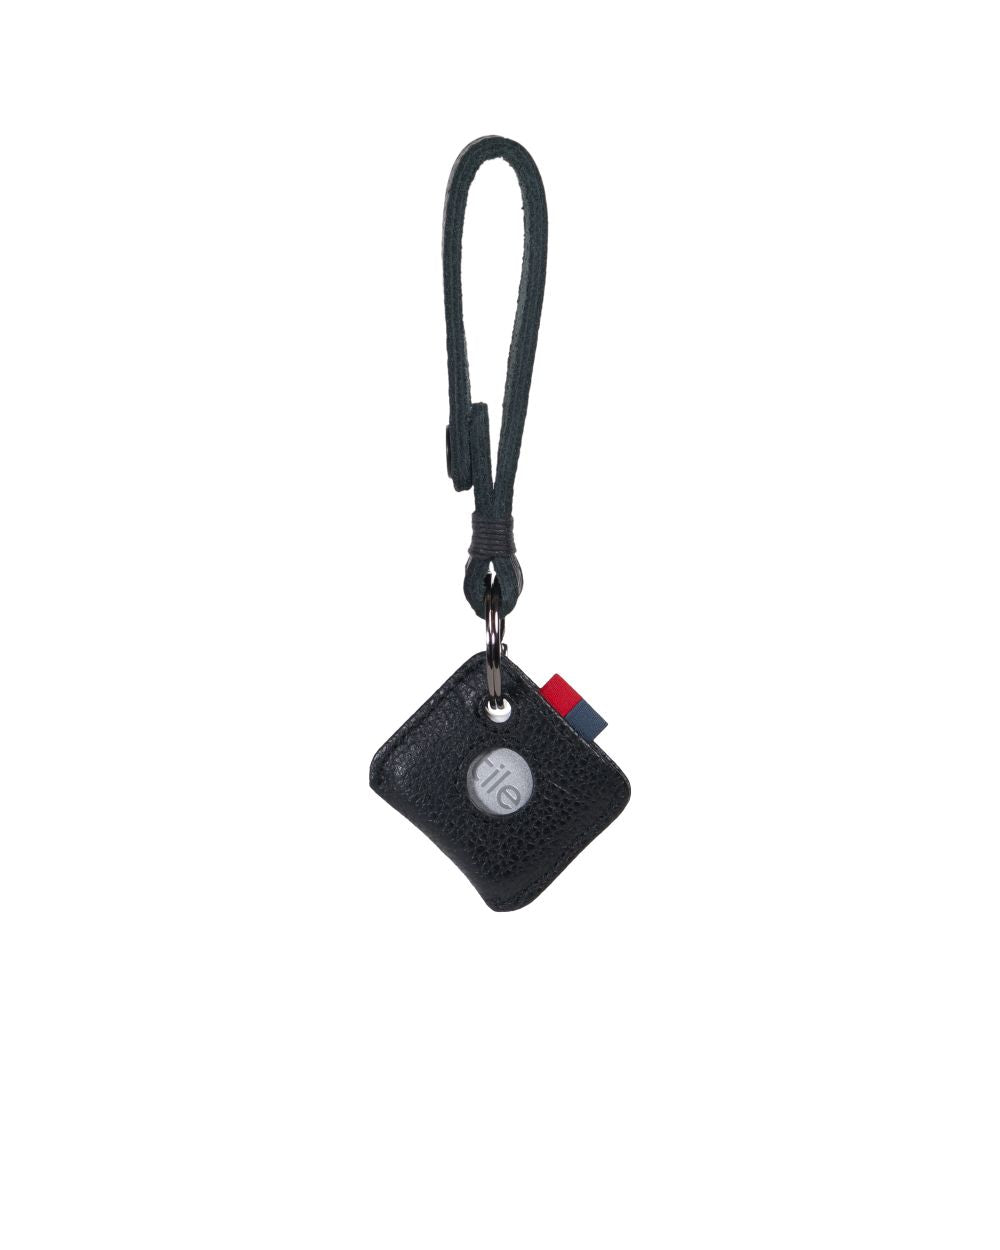 Herschel Supply Co - Key Chain + Tile Mate, Black Leather